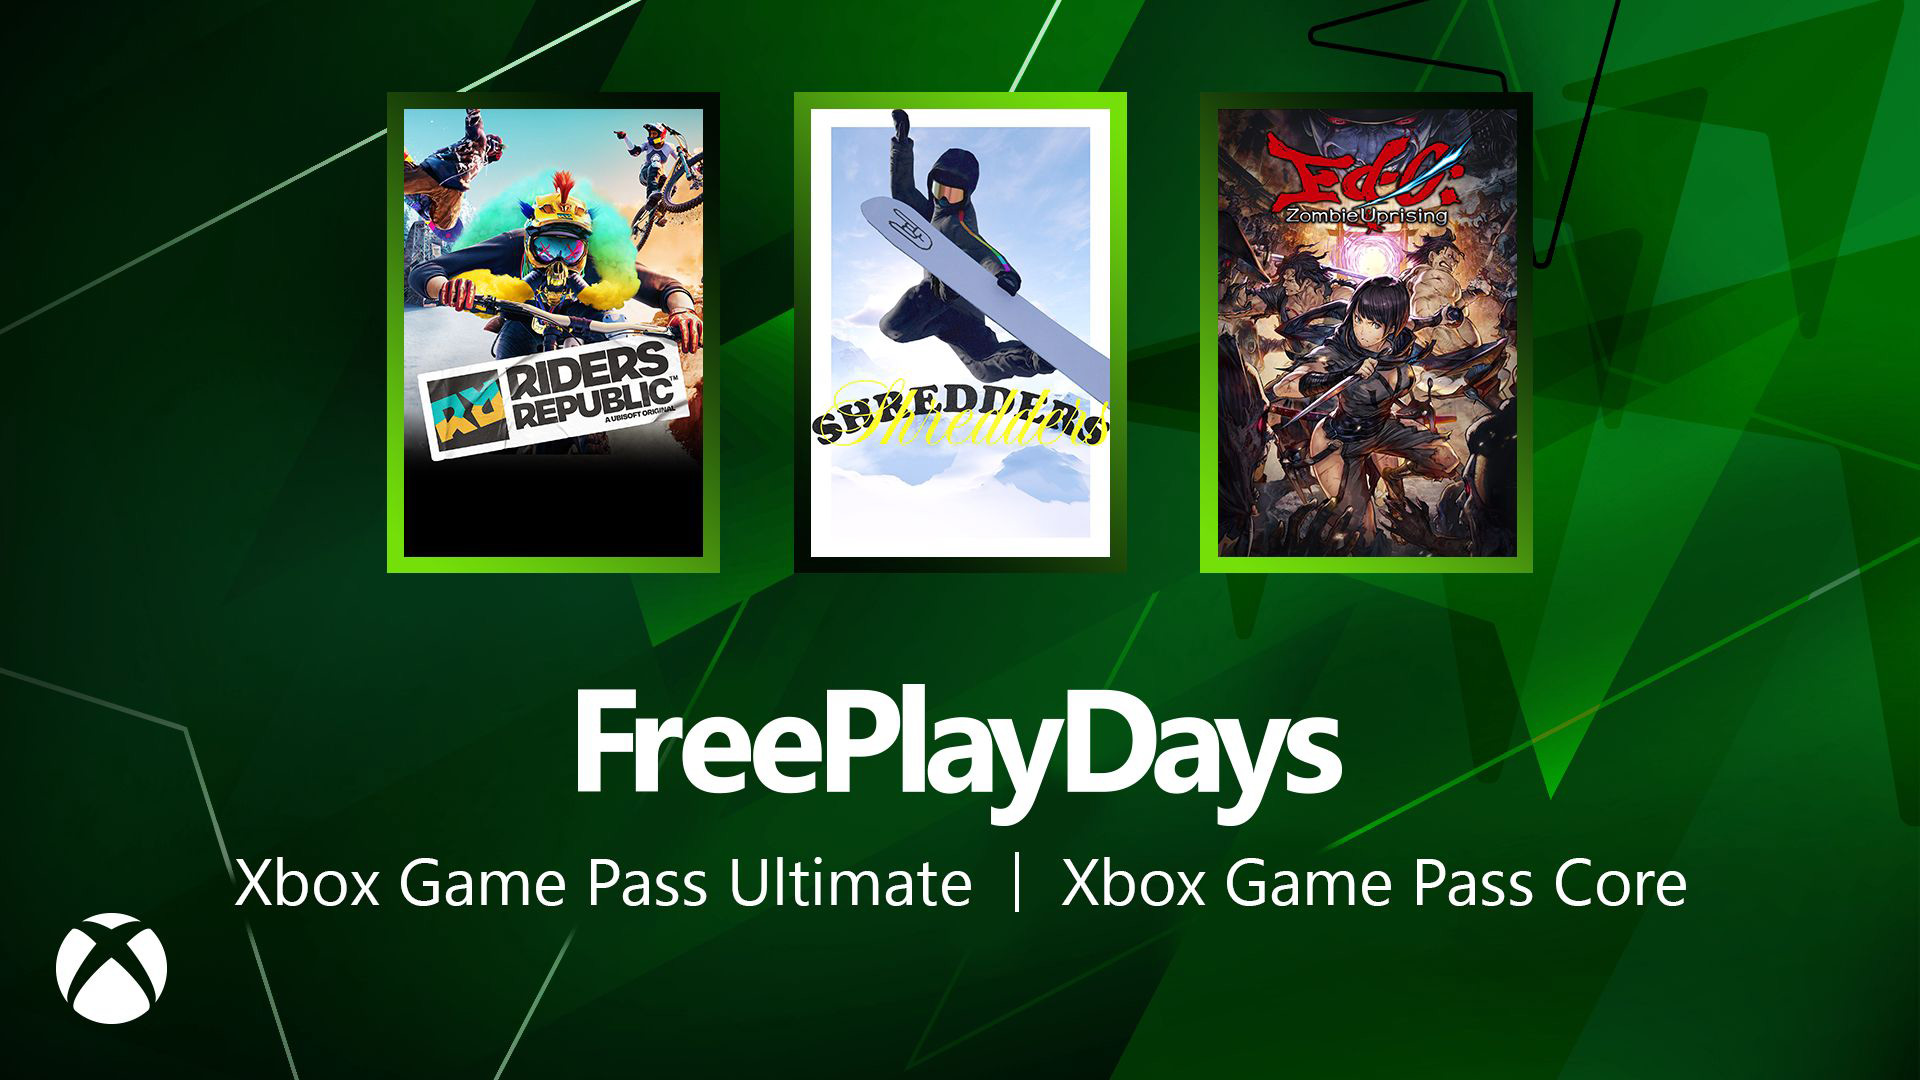 Xbox has announced three games available for Free Play Days starting today